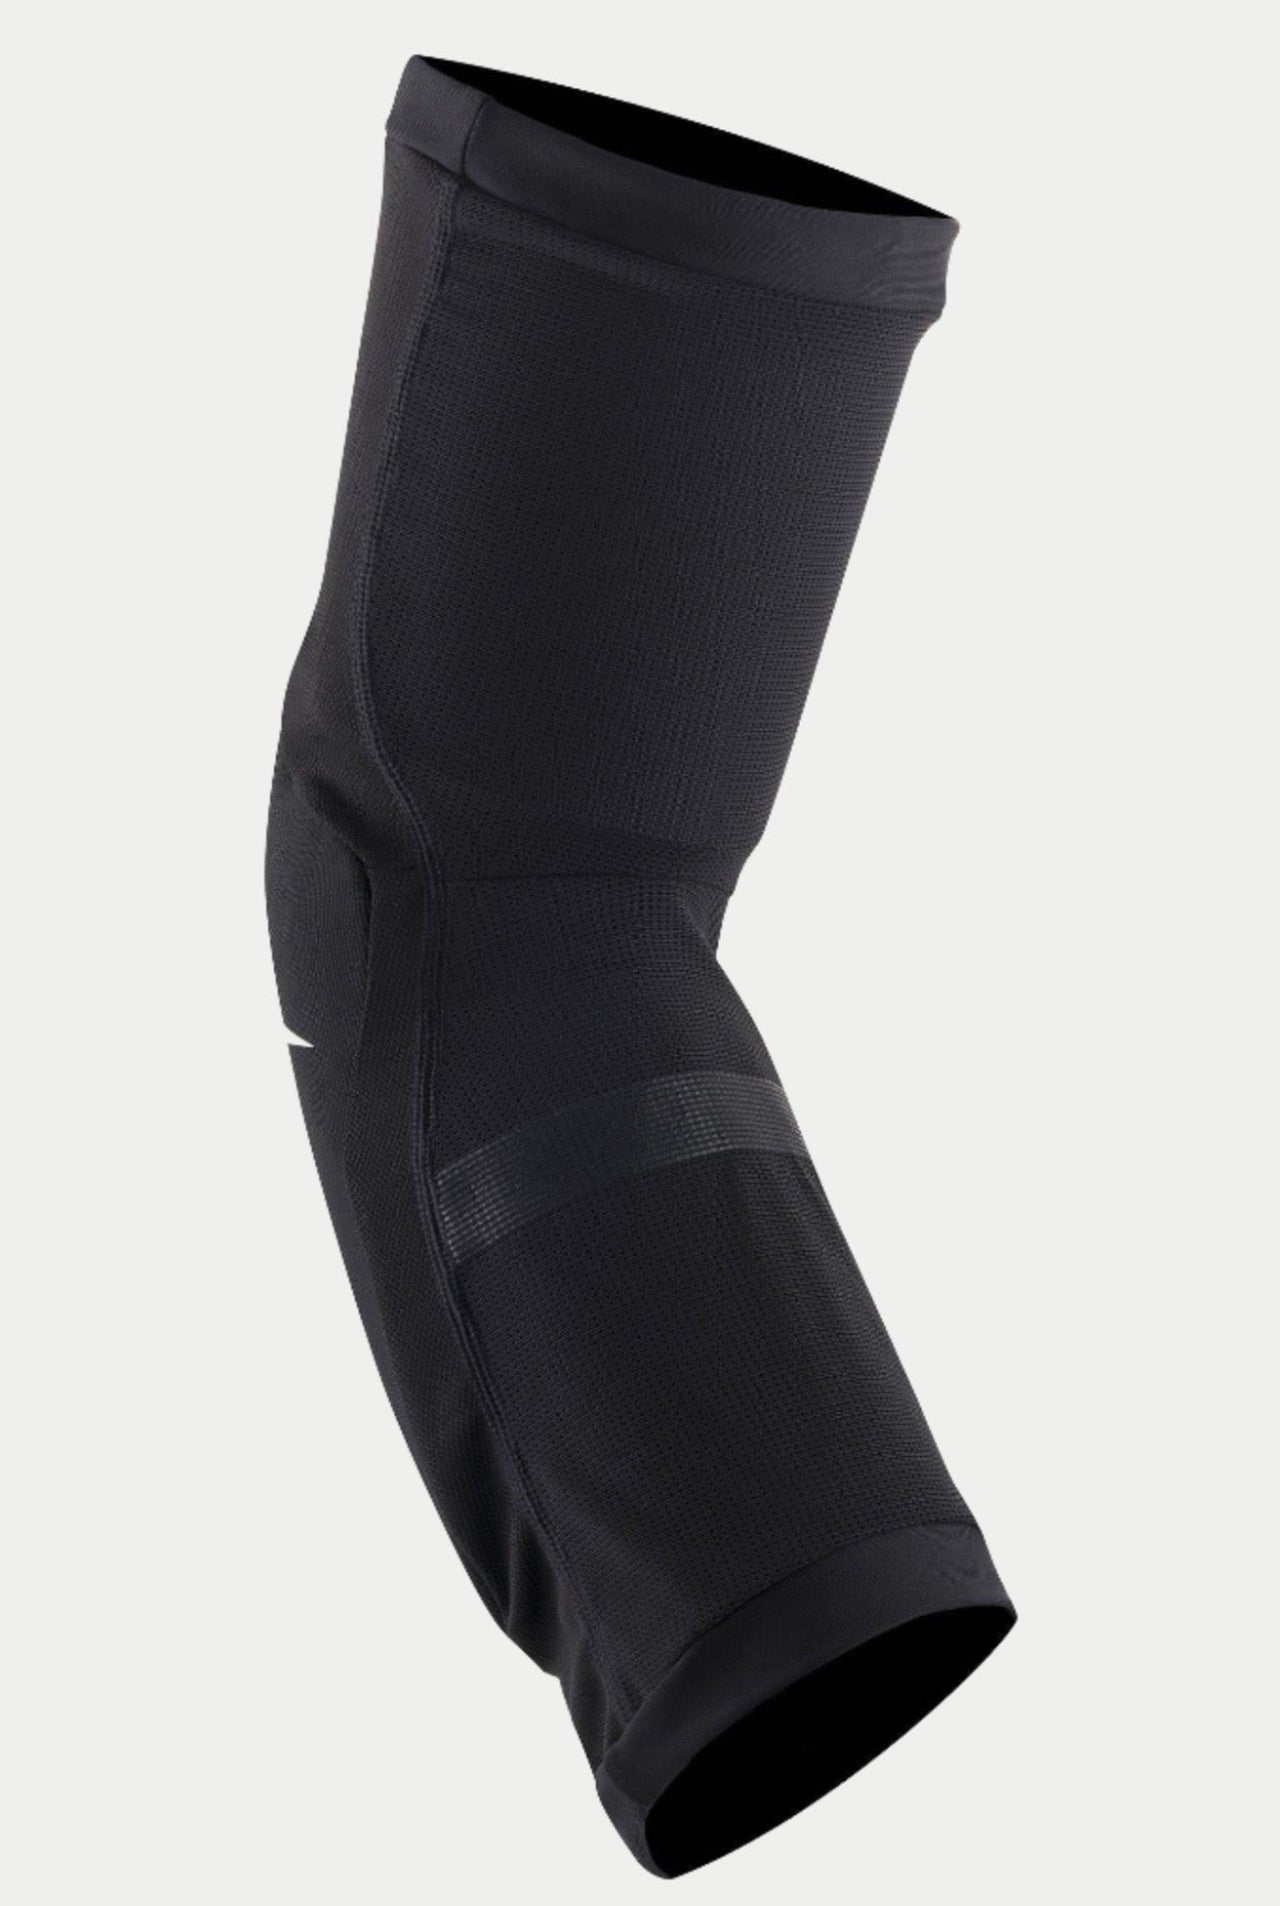 Youth Paragon Plus Knee Protector